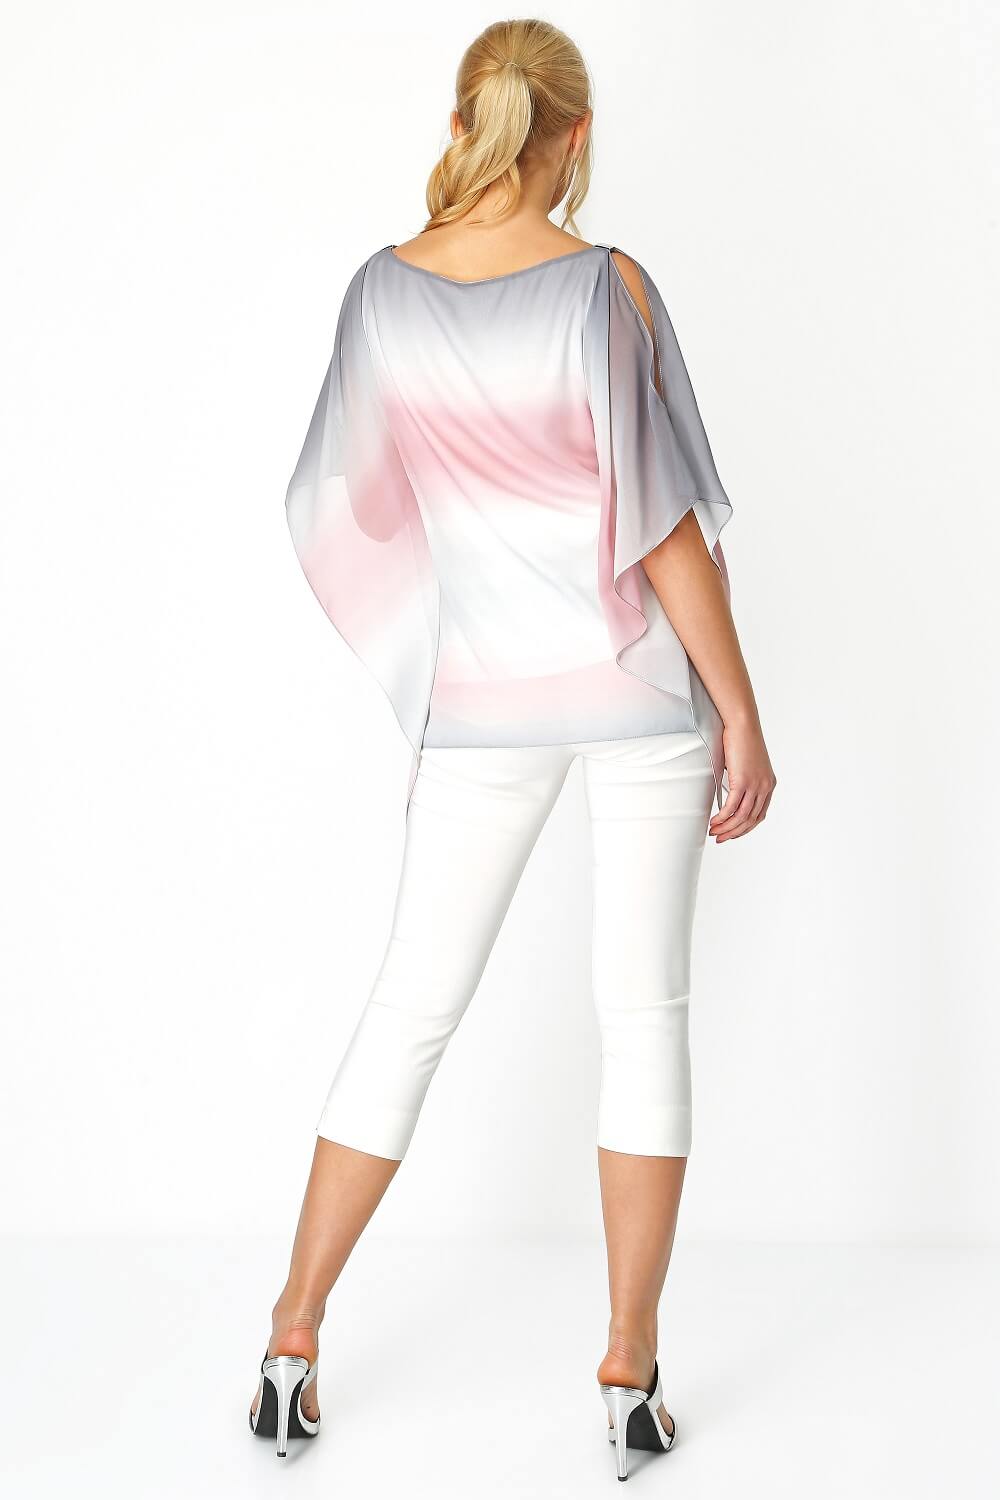 PINK Ombre Split Sleeve Overlay Top, Image 3 of 8